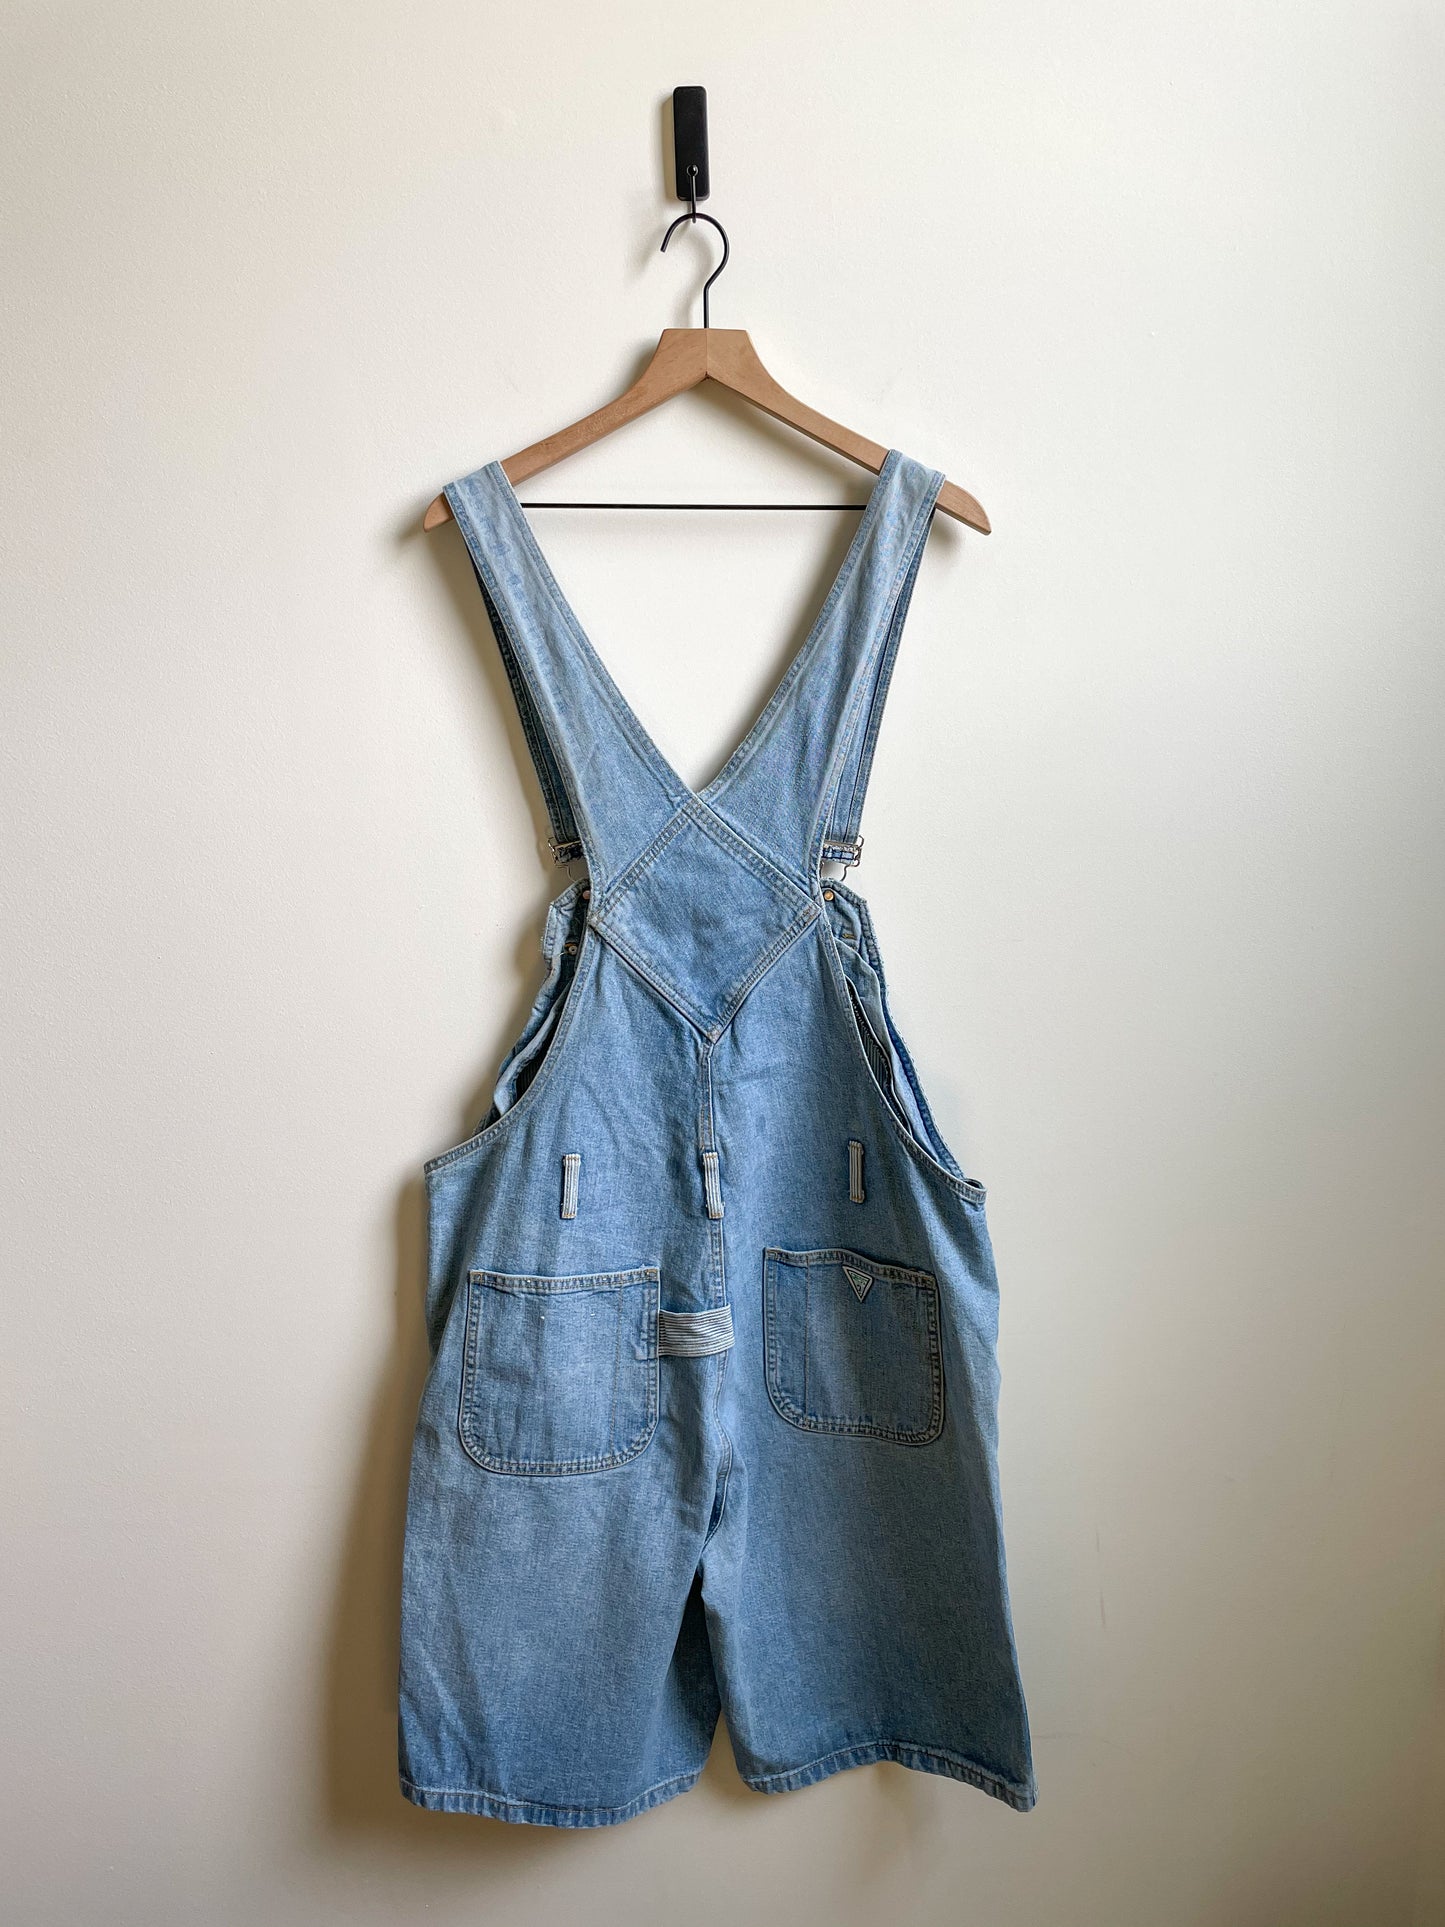 Vintage Guess Two-tone Overalls